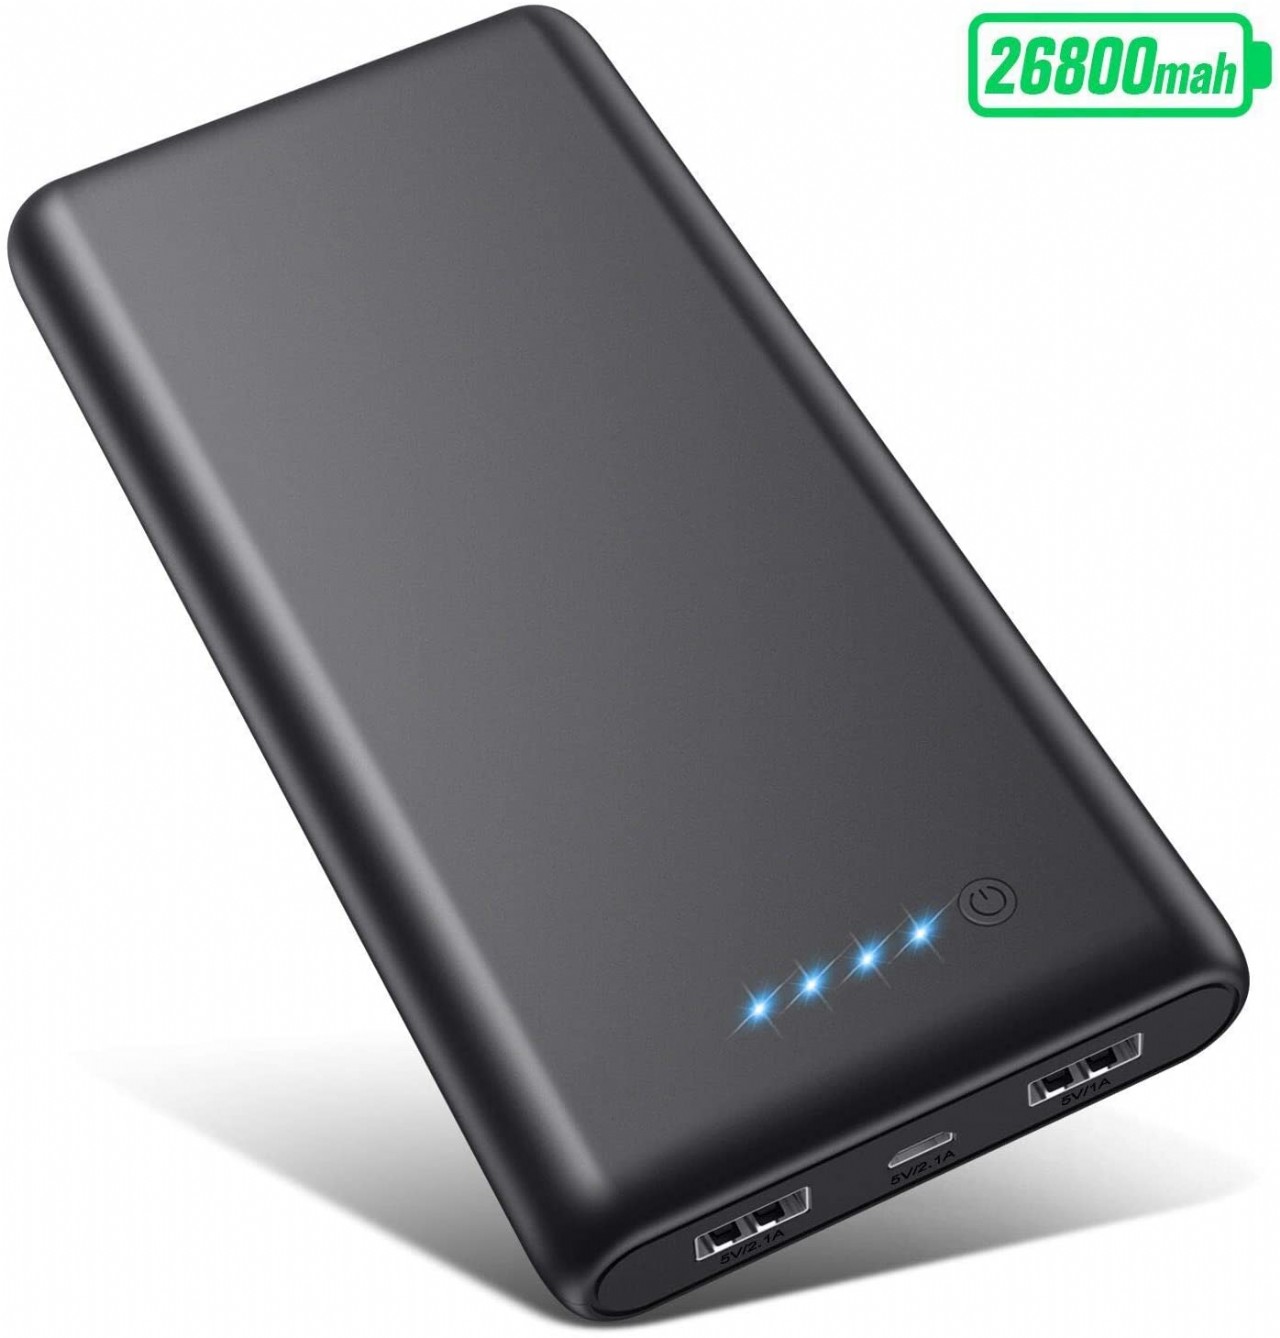 Portable Charger Power Bank 26800mah, Ultra-High Capacity Safer External Cell Phone Battery Pack